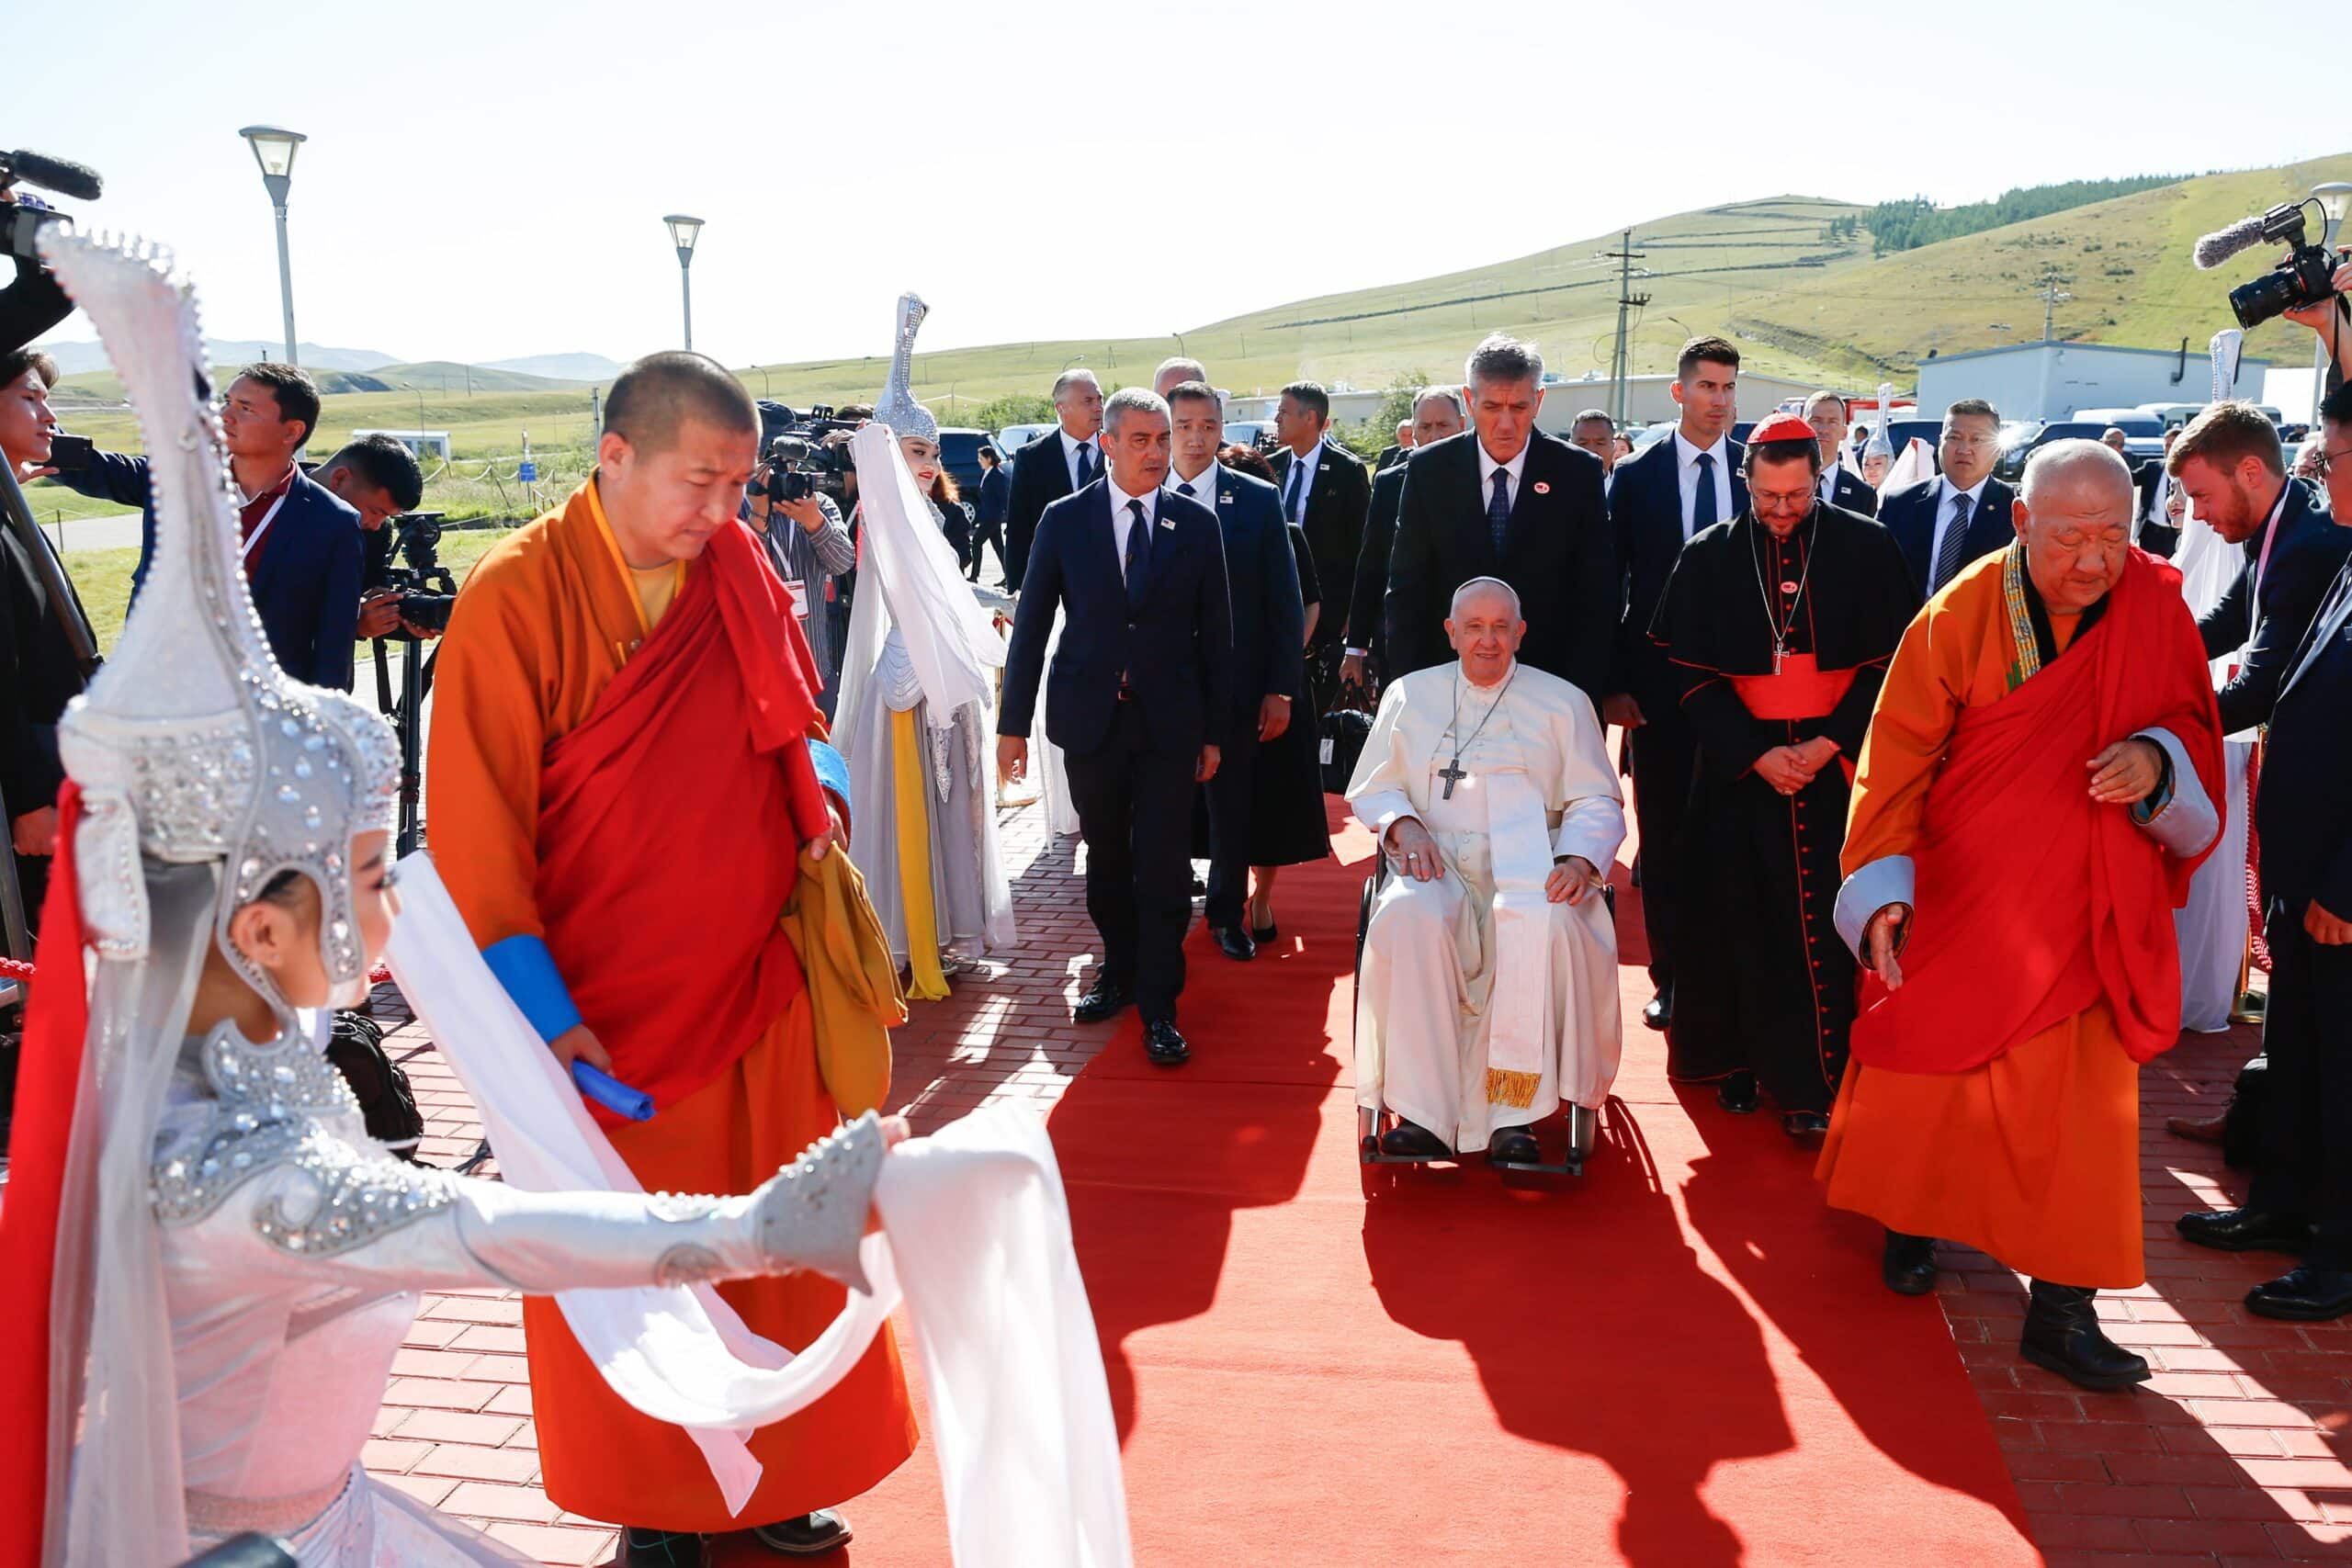 Pope Francis arrives for a meeting with religious leaders in Mongolia